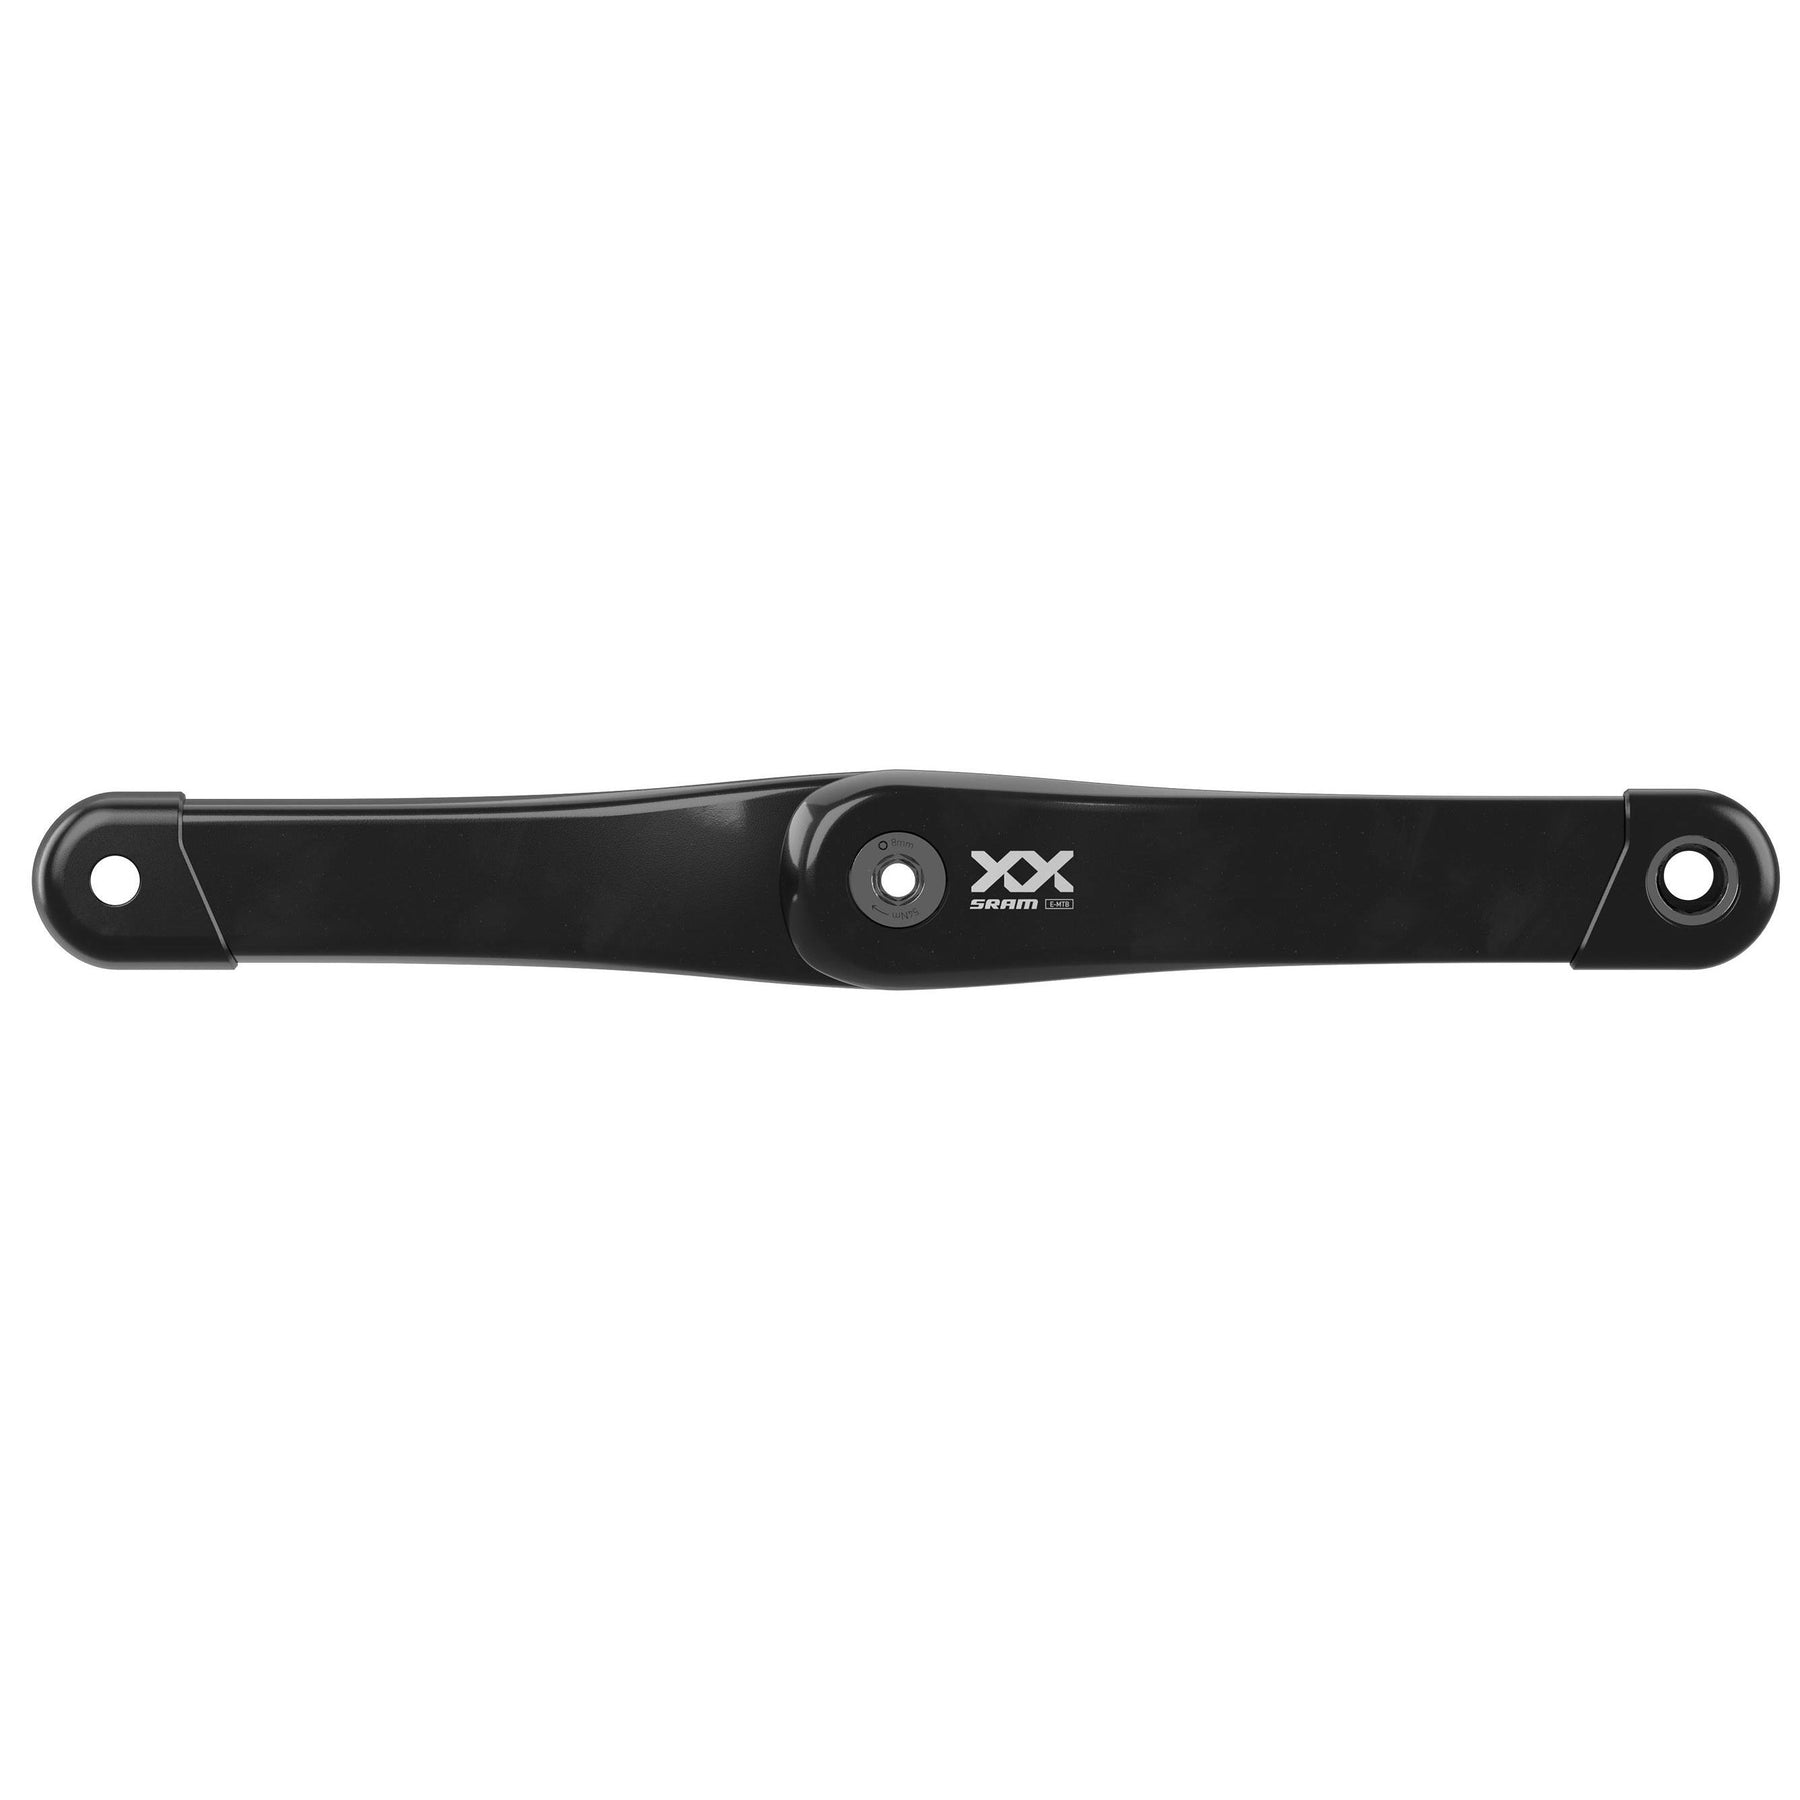 SRAM XX Isis Crank Arm Assembly - For Pedal Assist